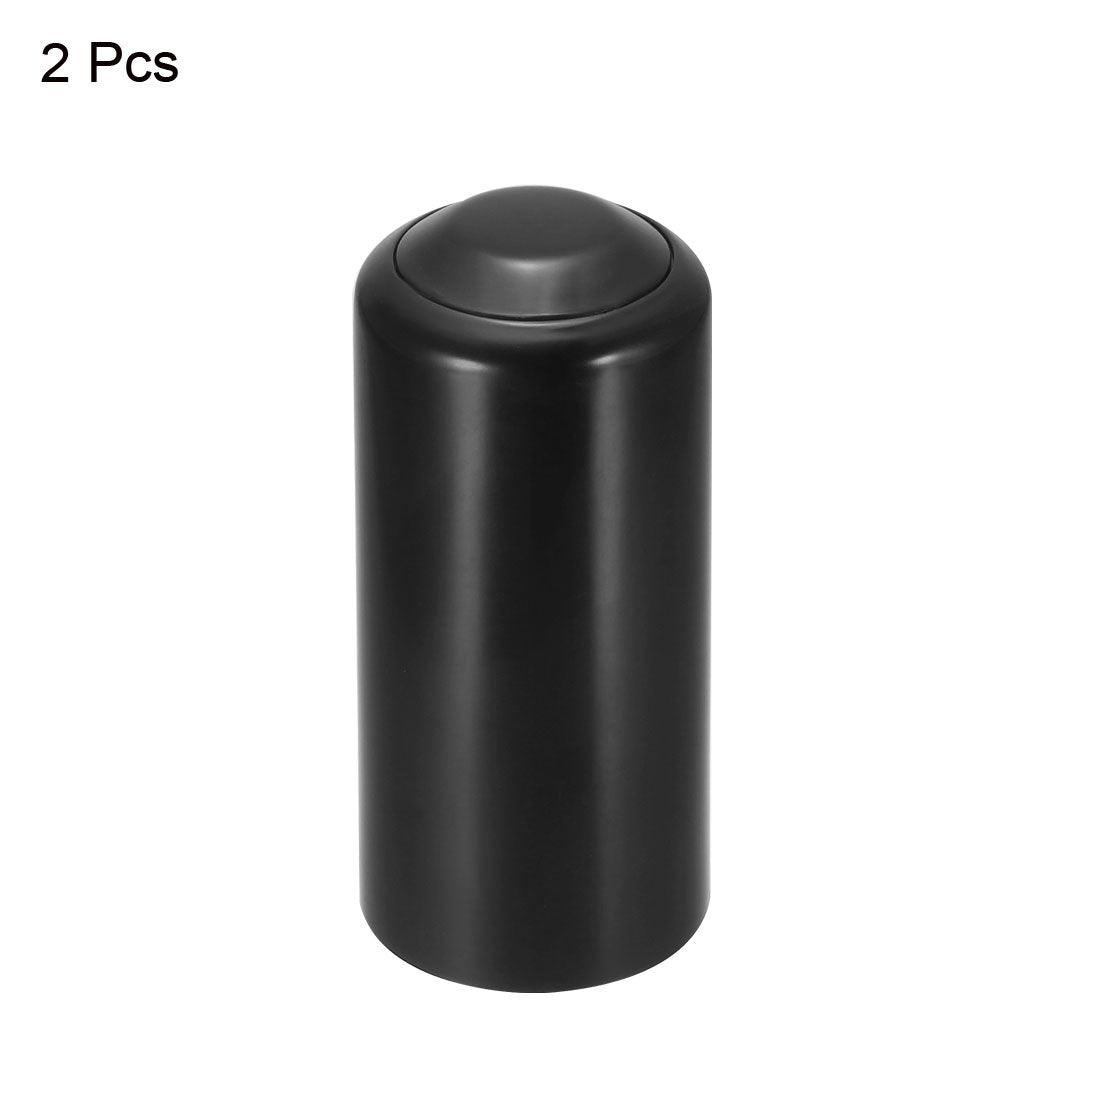 uxcell Uxcell Battery Cover Mic Battery Screw on Cap Cup Cover for PGX24 SLX24 PG58 SM58 BETA58 Wireless Black 2Pcs